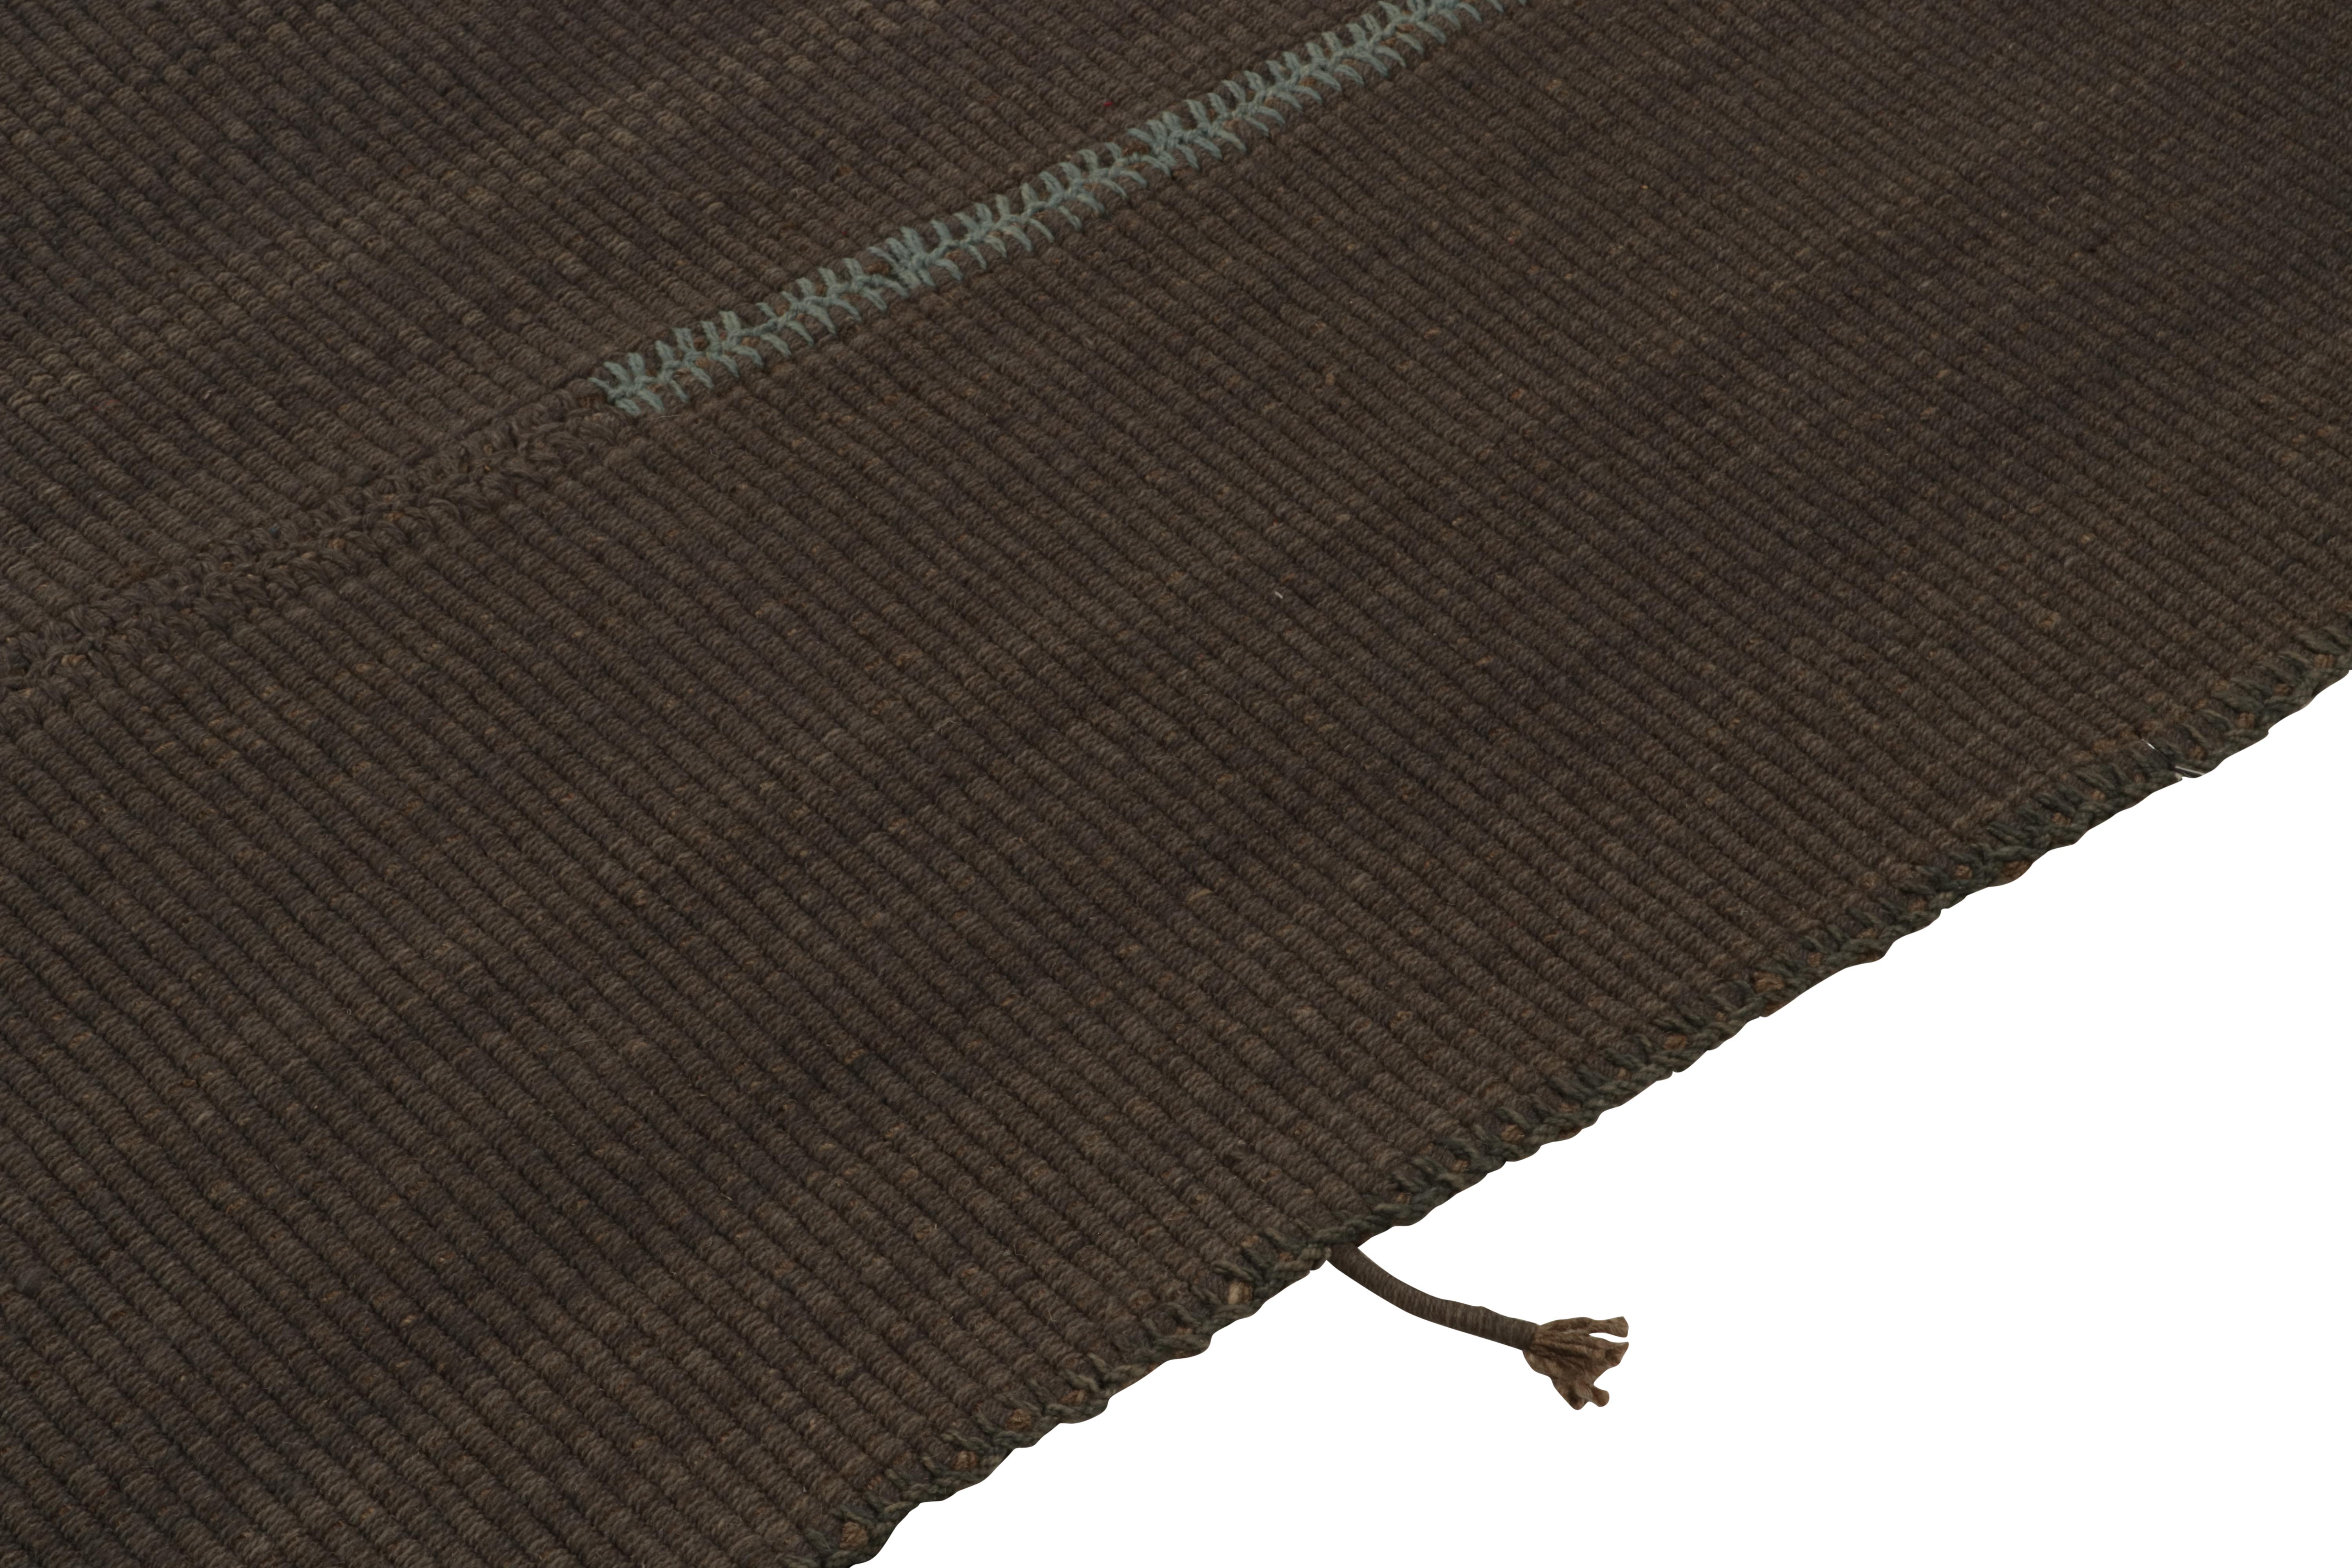 Rug & Kilim's Contemporary Oversized Kilim in Brown Muted Stripes, Blue Accents (Handgeknüpft) im Angebot